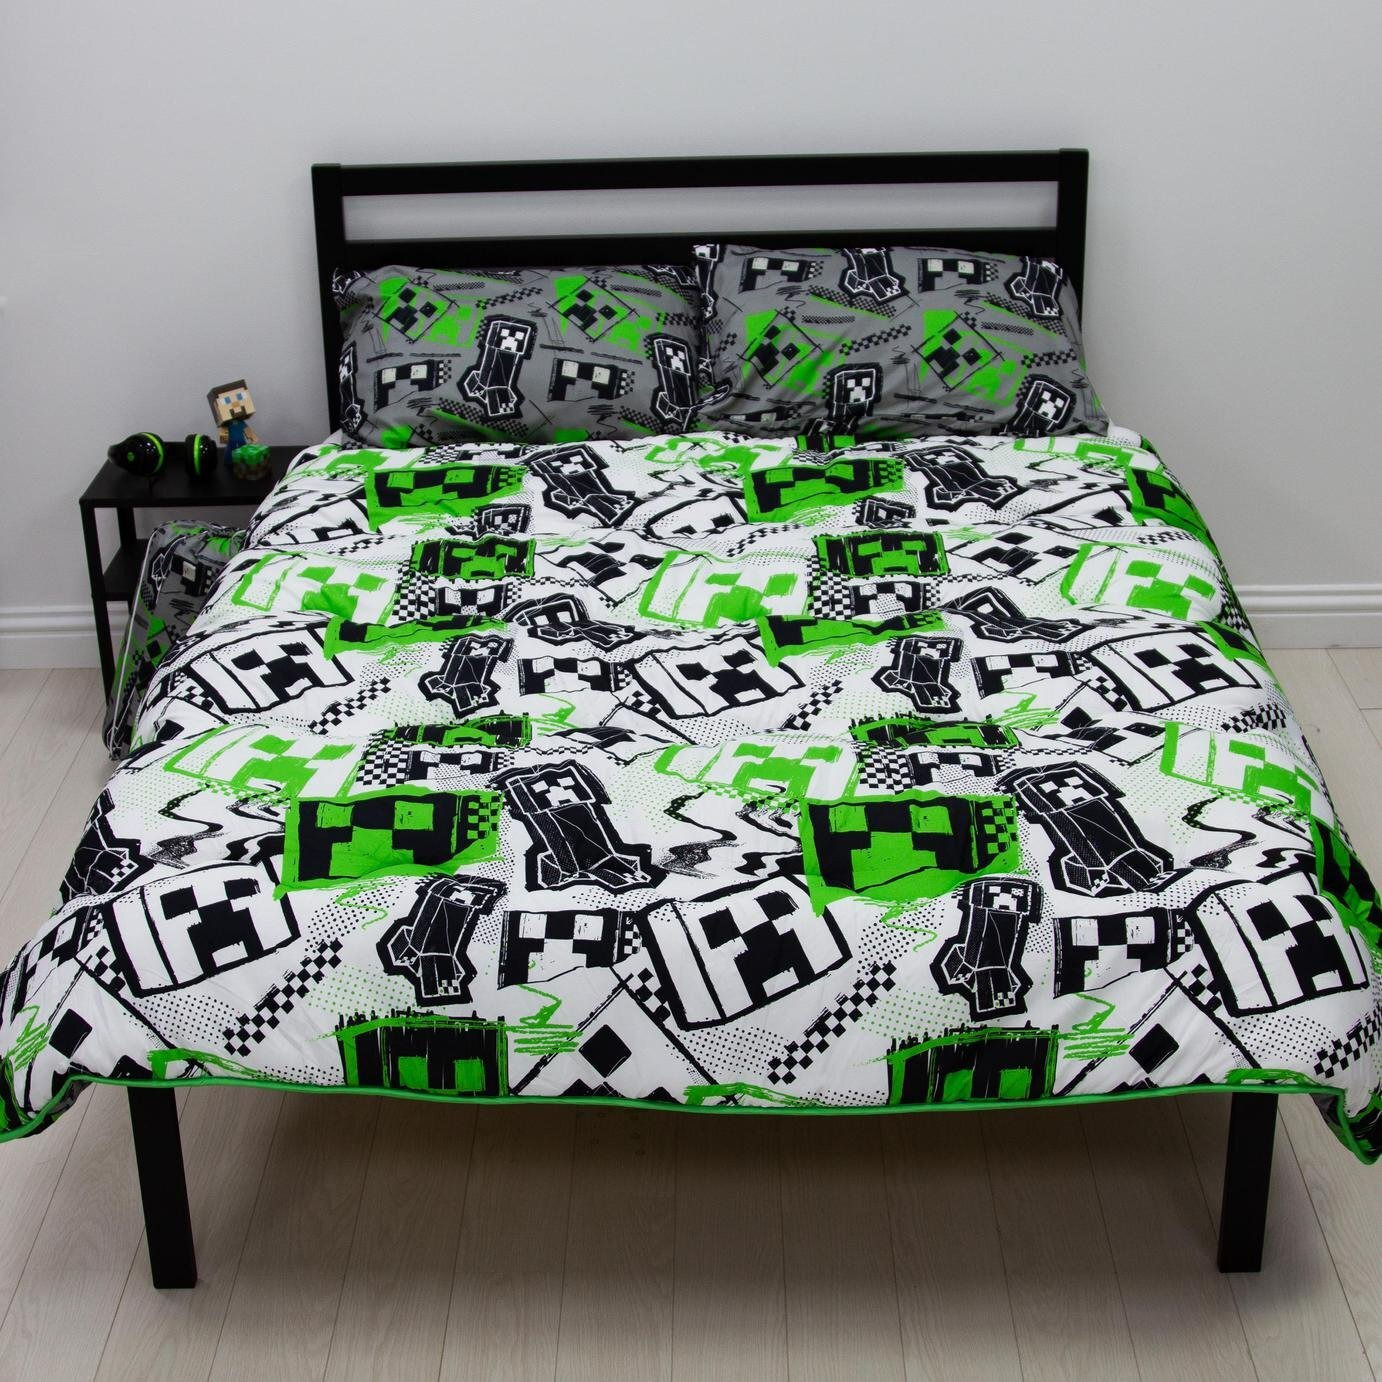 Minecraft 10.5 Tog Coverless Kids Bedding Set - Double - image 1